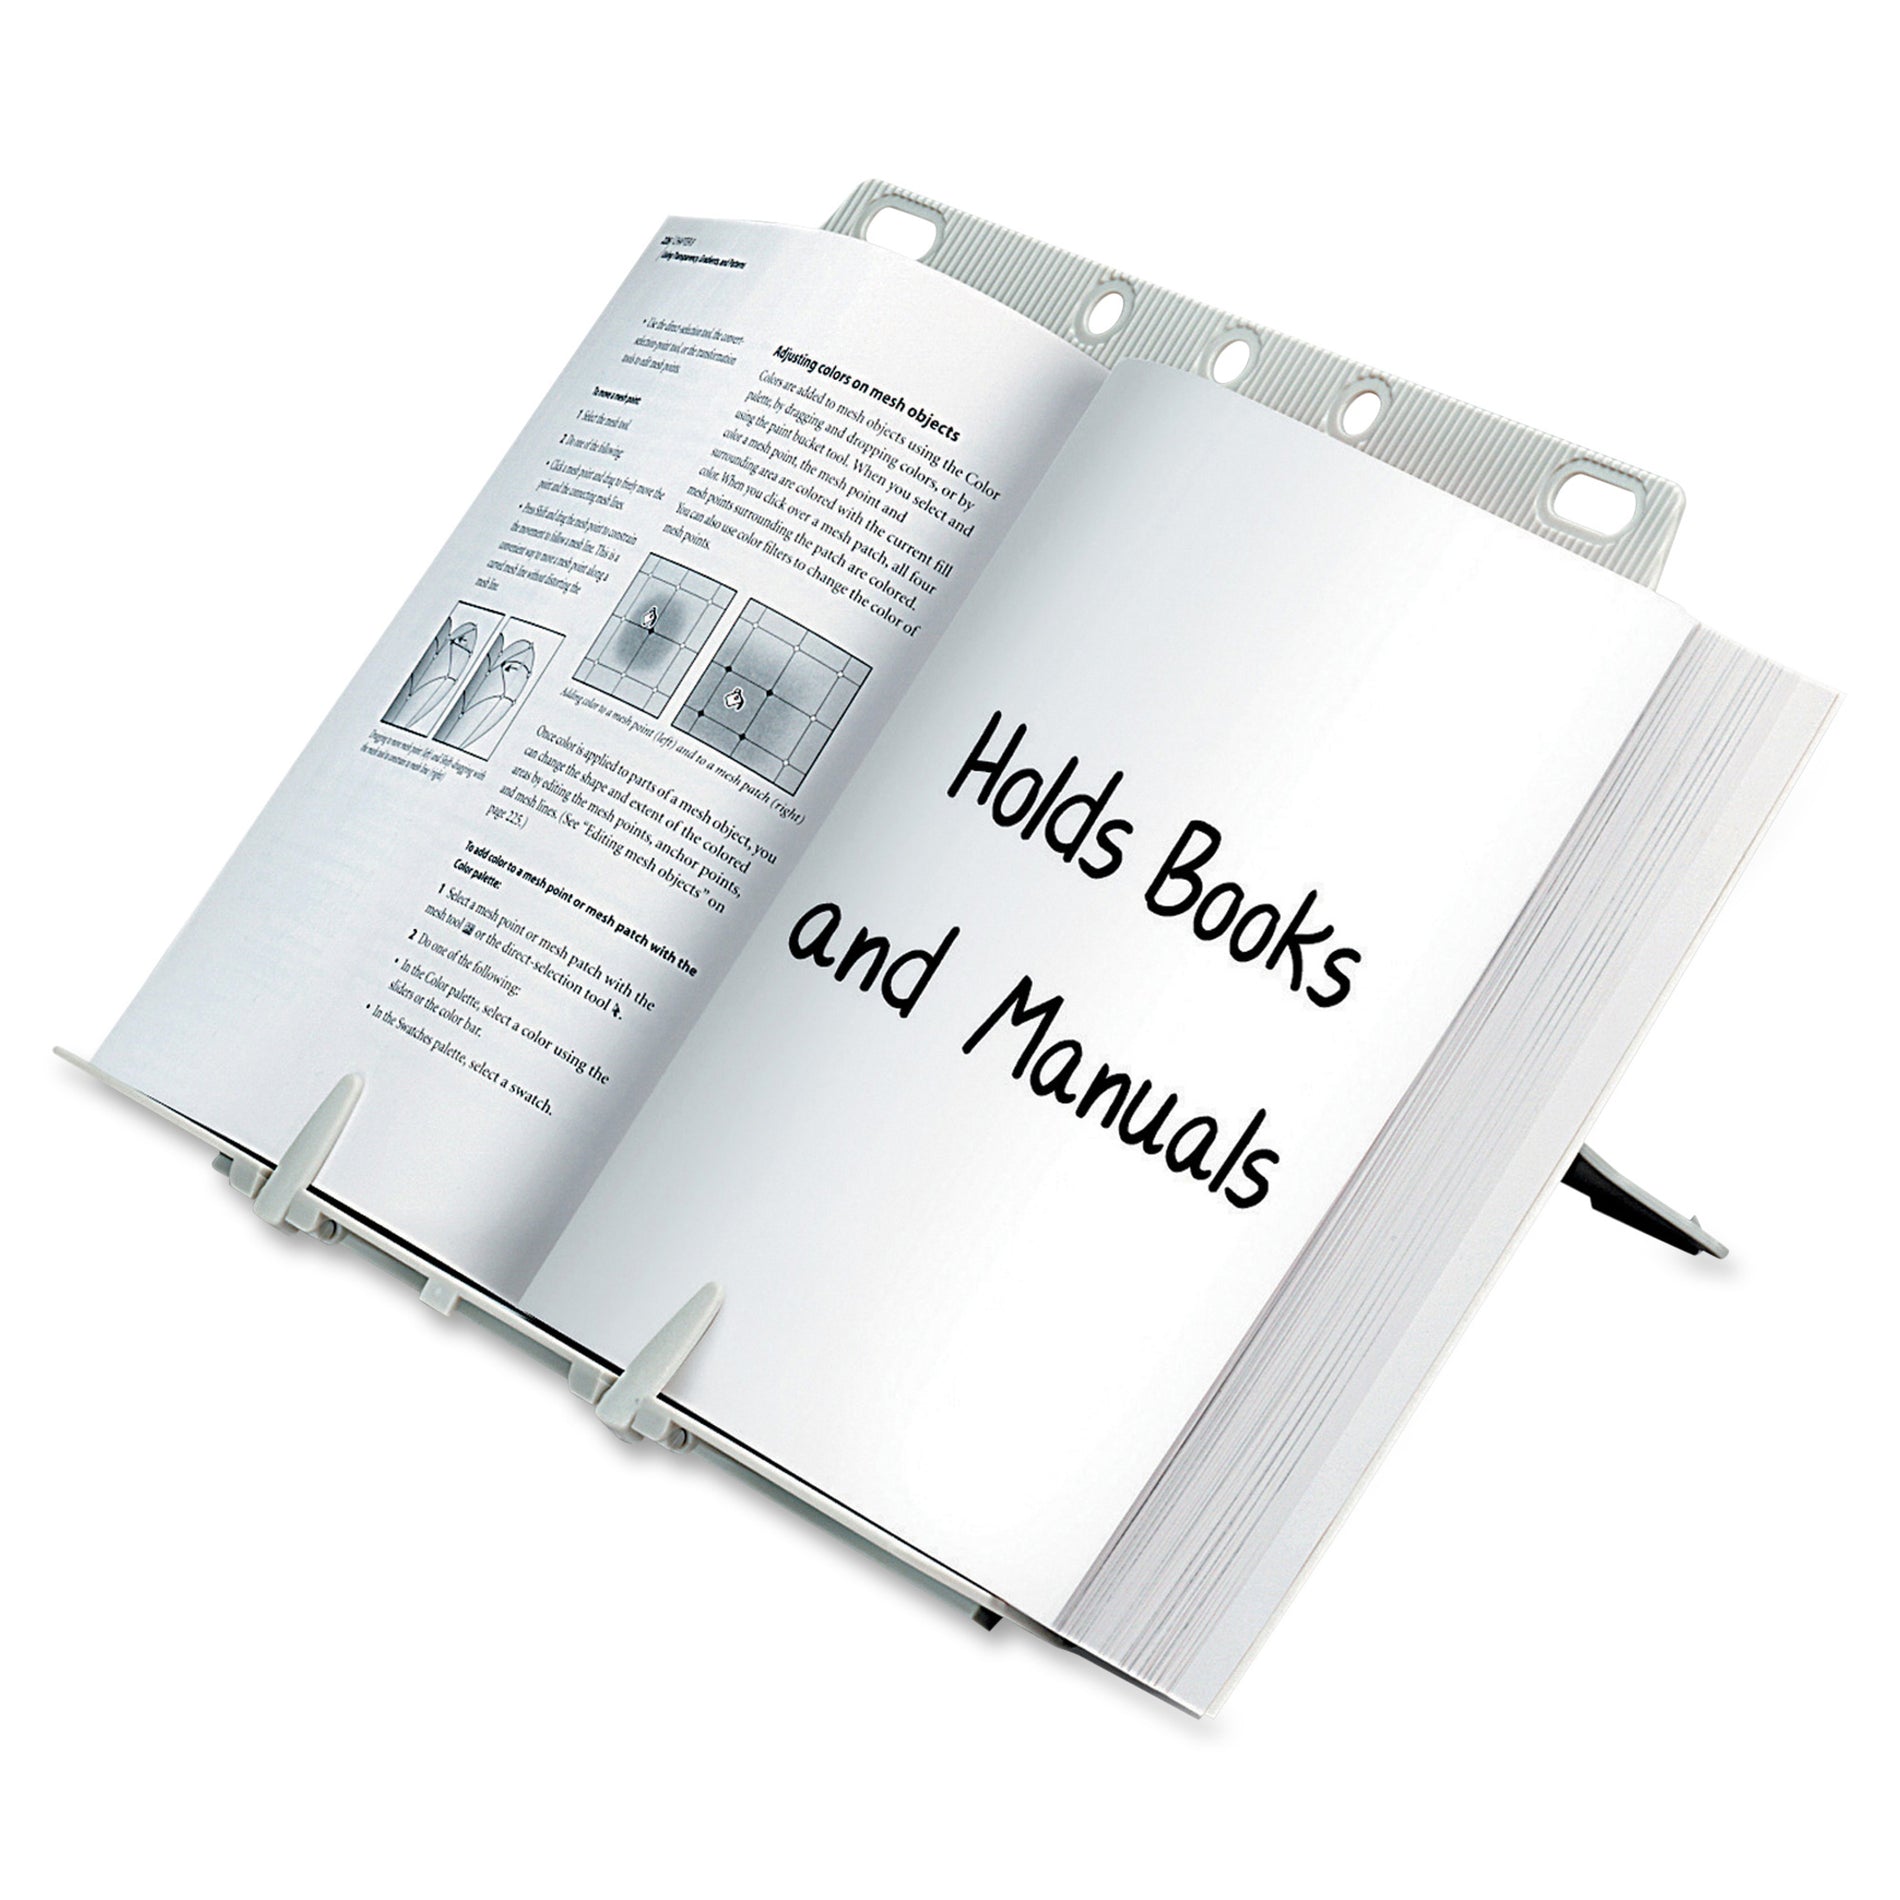 Fellowes 21100 Booklift Copyholders, Platinum - Convenient Copy Holder for Books and Documents